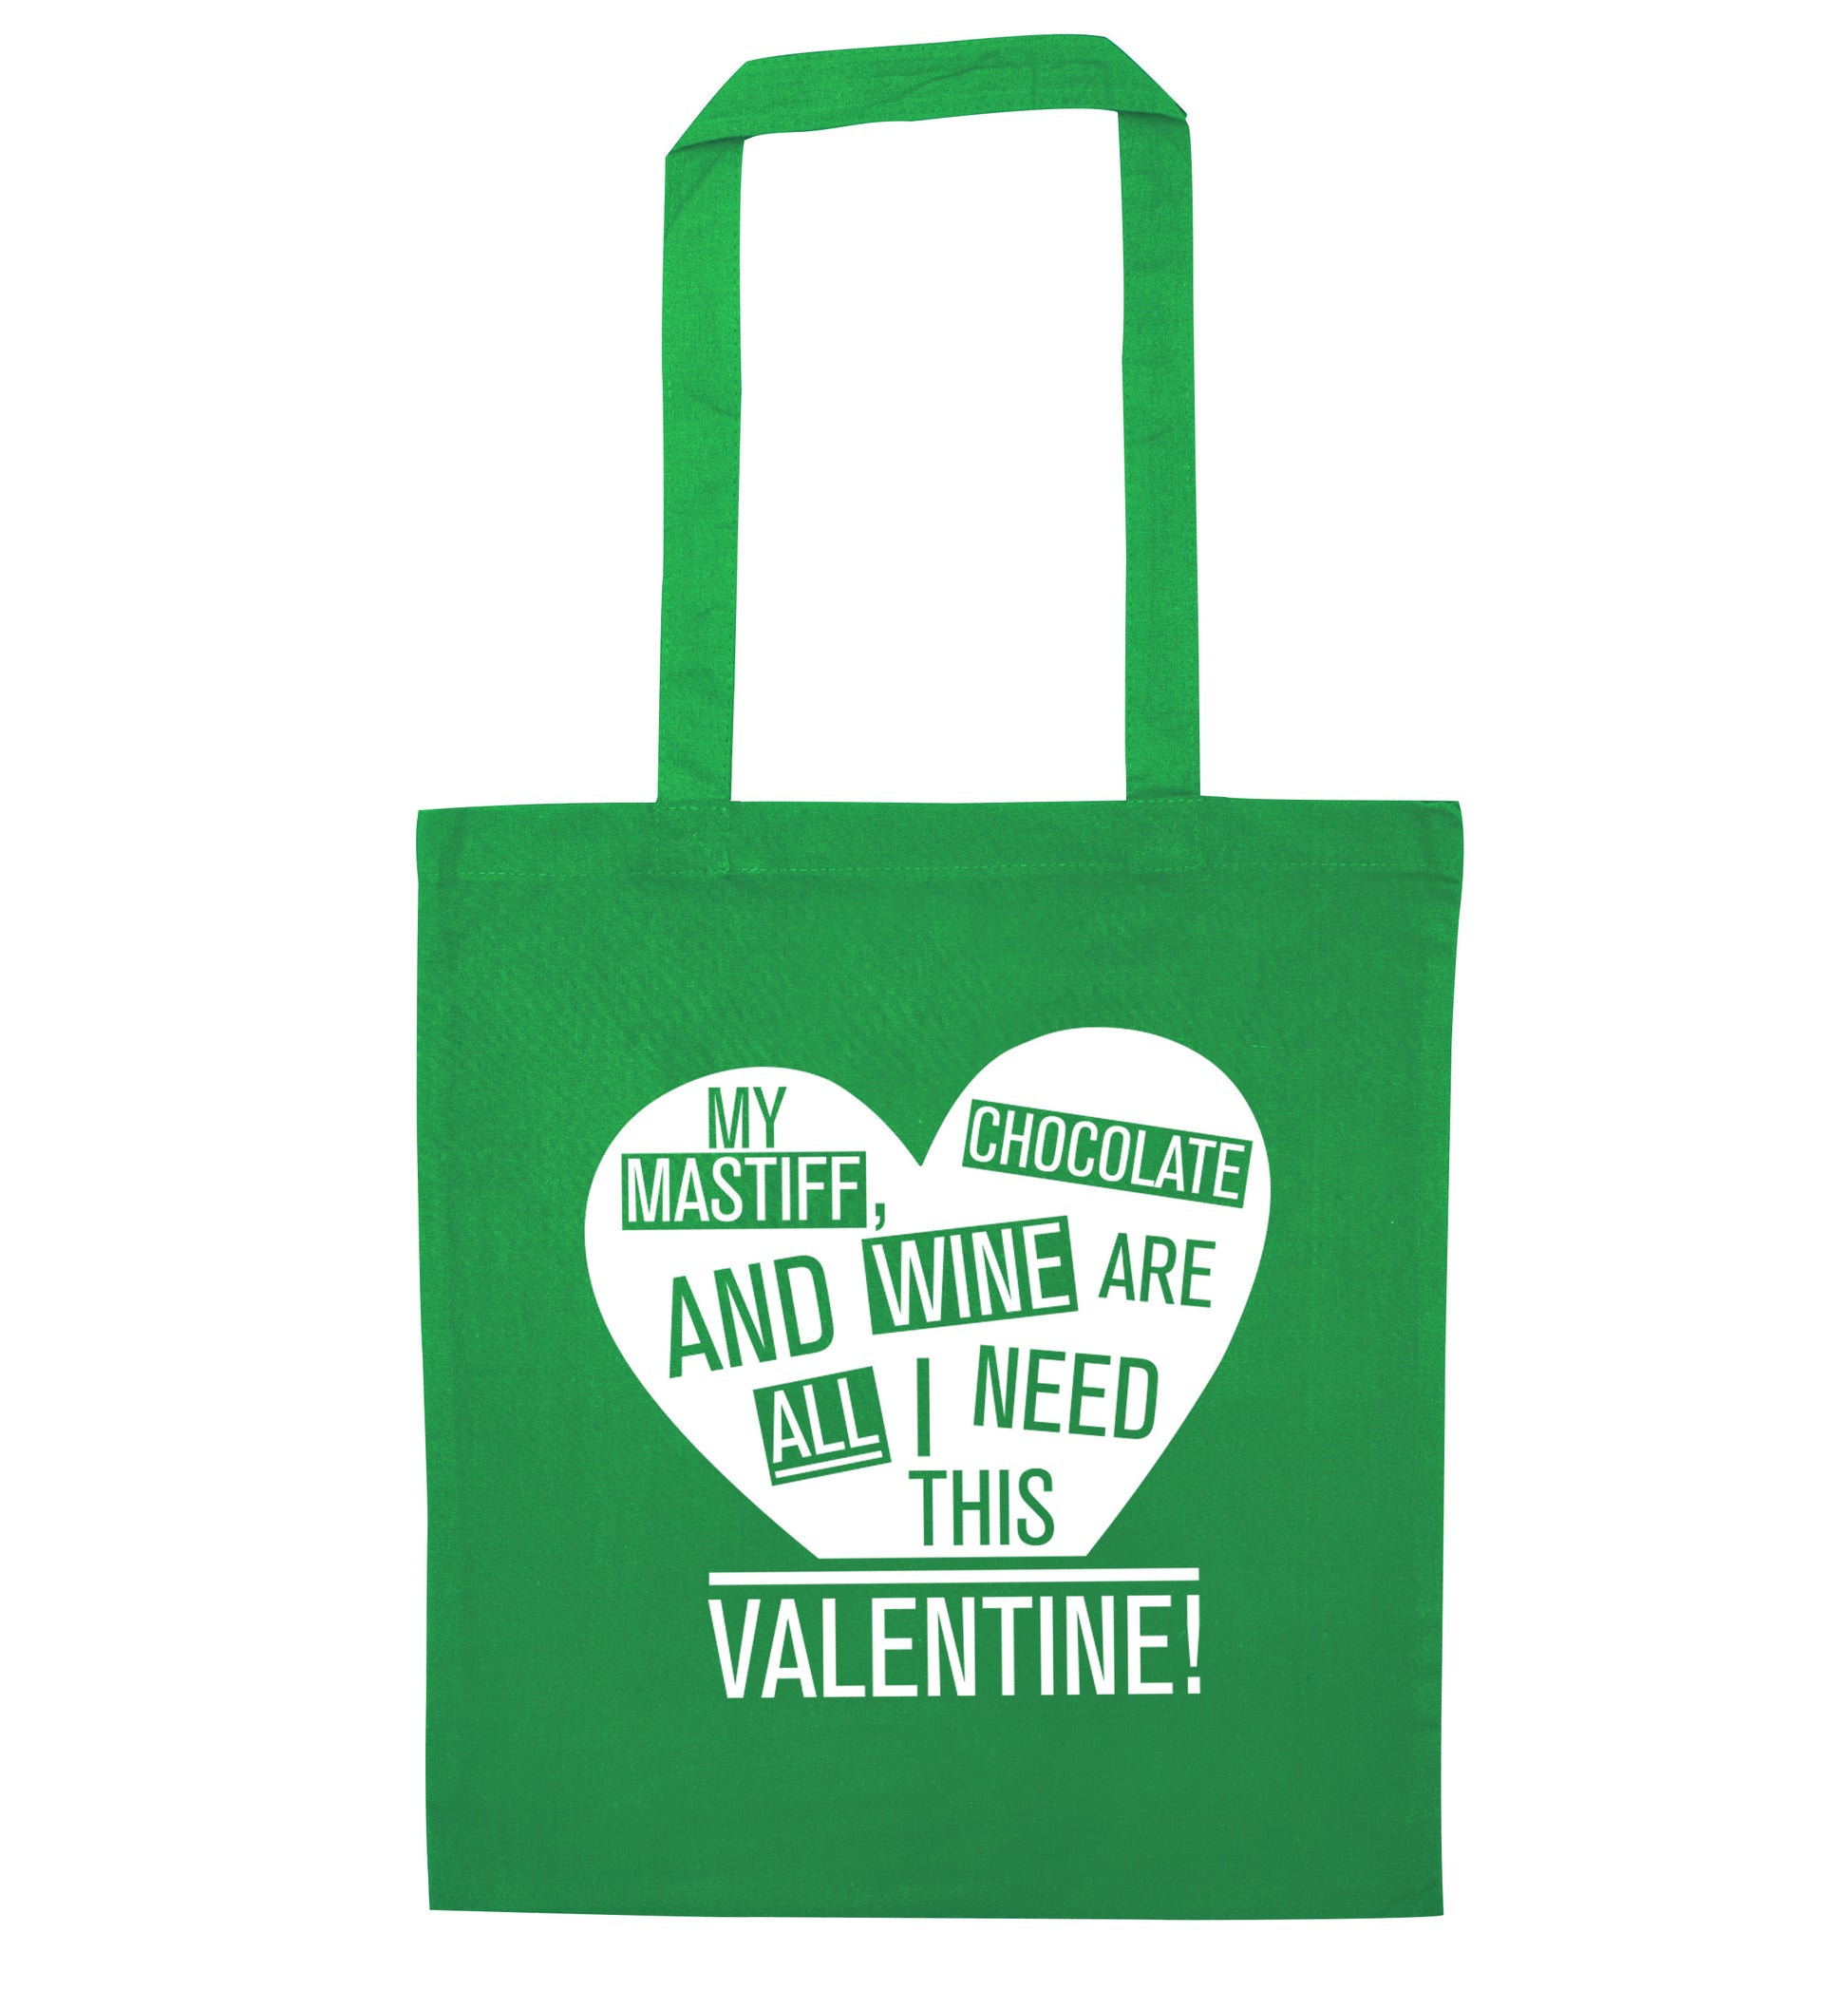 My mastiff, chocolate and wine are all I need this valentine! green tote bag